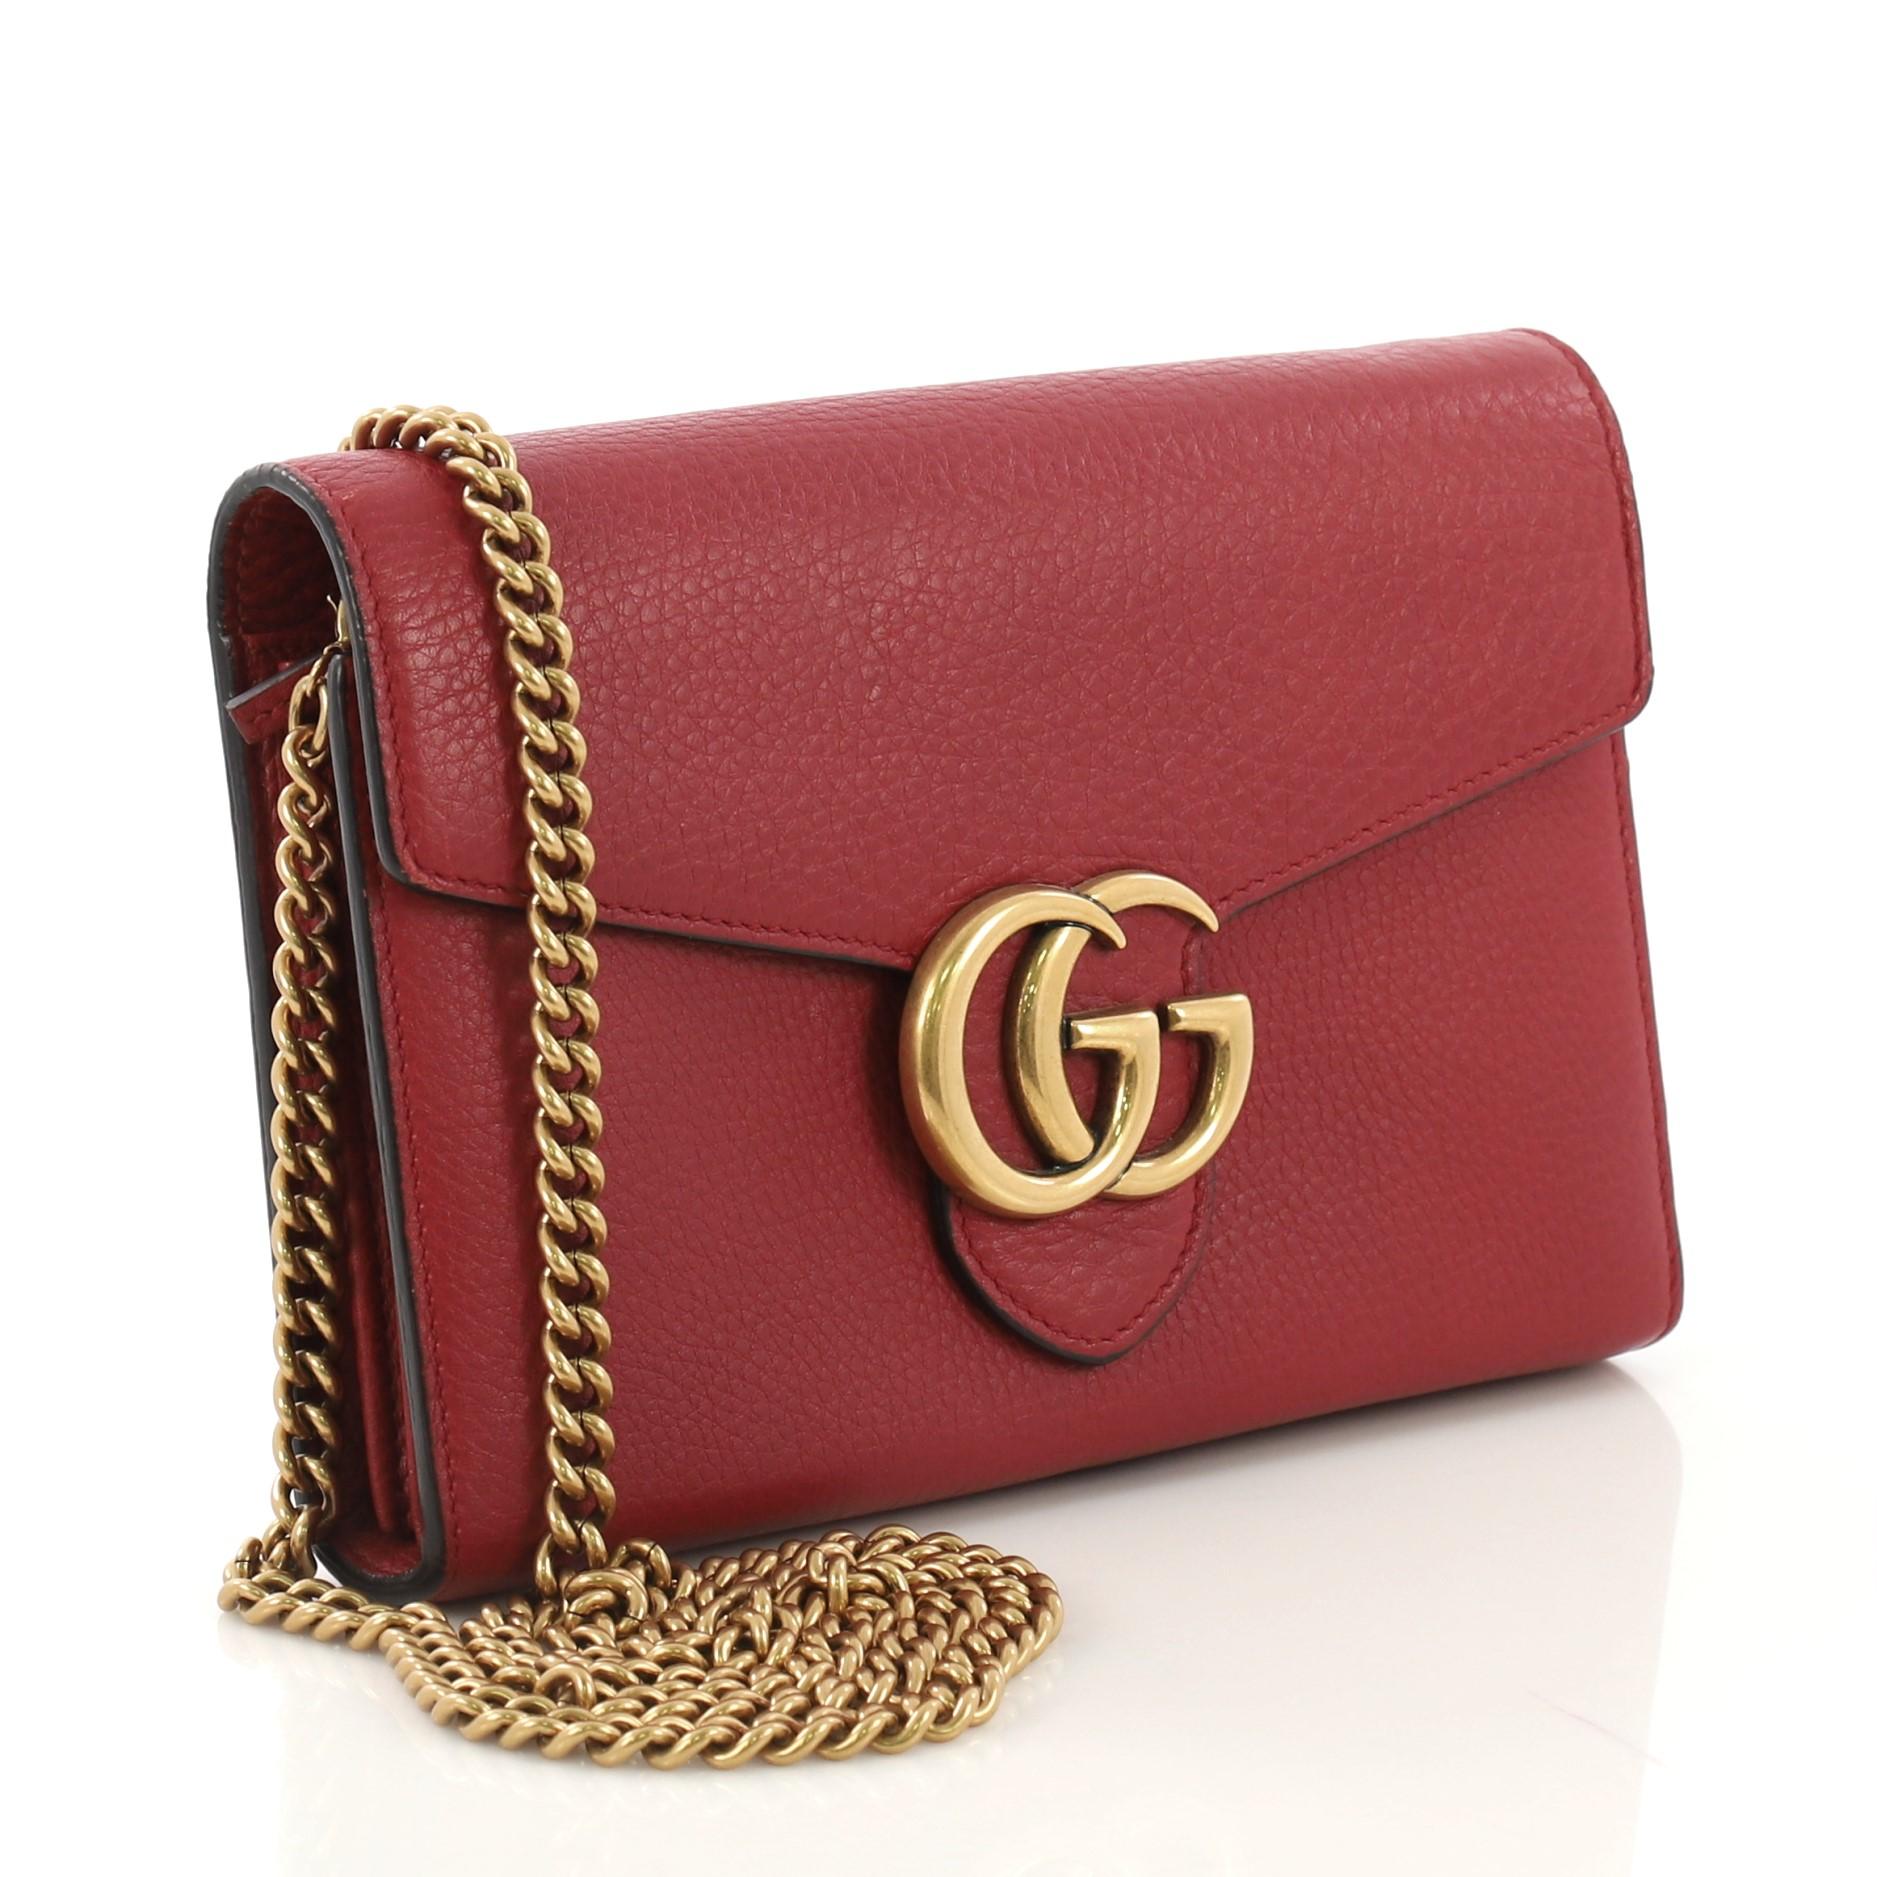 This Gucci GG Marmont Chain Wallet Leather Mini, crafted from red leather, features chain-link shoulder strap, interlocking GG logo, and aged gold-tone hardware. Its snap closure opens to a black fabric and red leather interior with multiple card